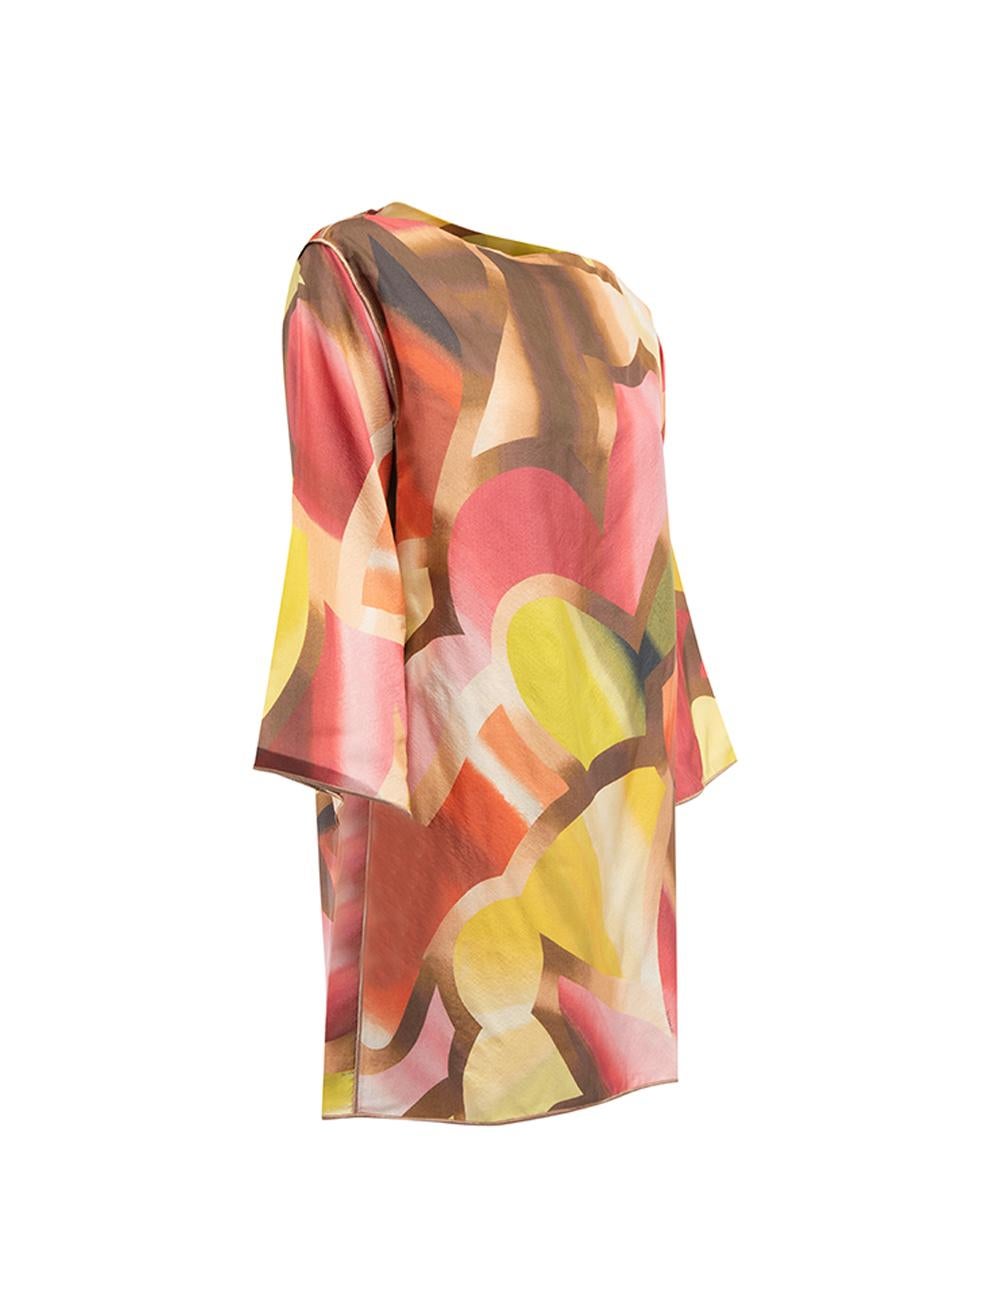 CONDITION is Very good. Hardly any visible wear to top is evident on this used Missoni designer resale item. Details Multicolour- Orange, yellow and pink Silk Tunic long top Long sleeves Abstract pattern Wide boat neckline Made in Italy Composition